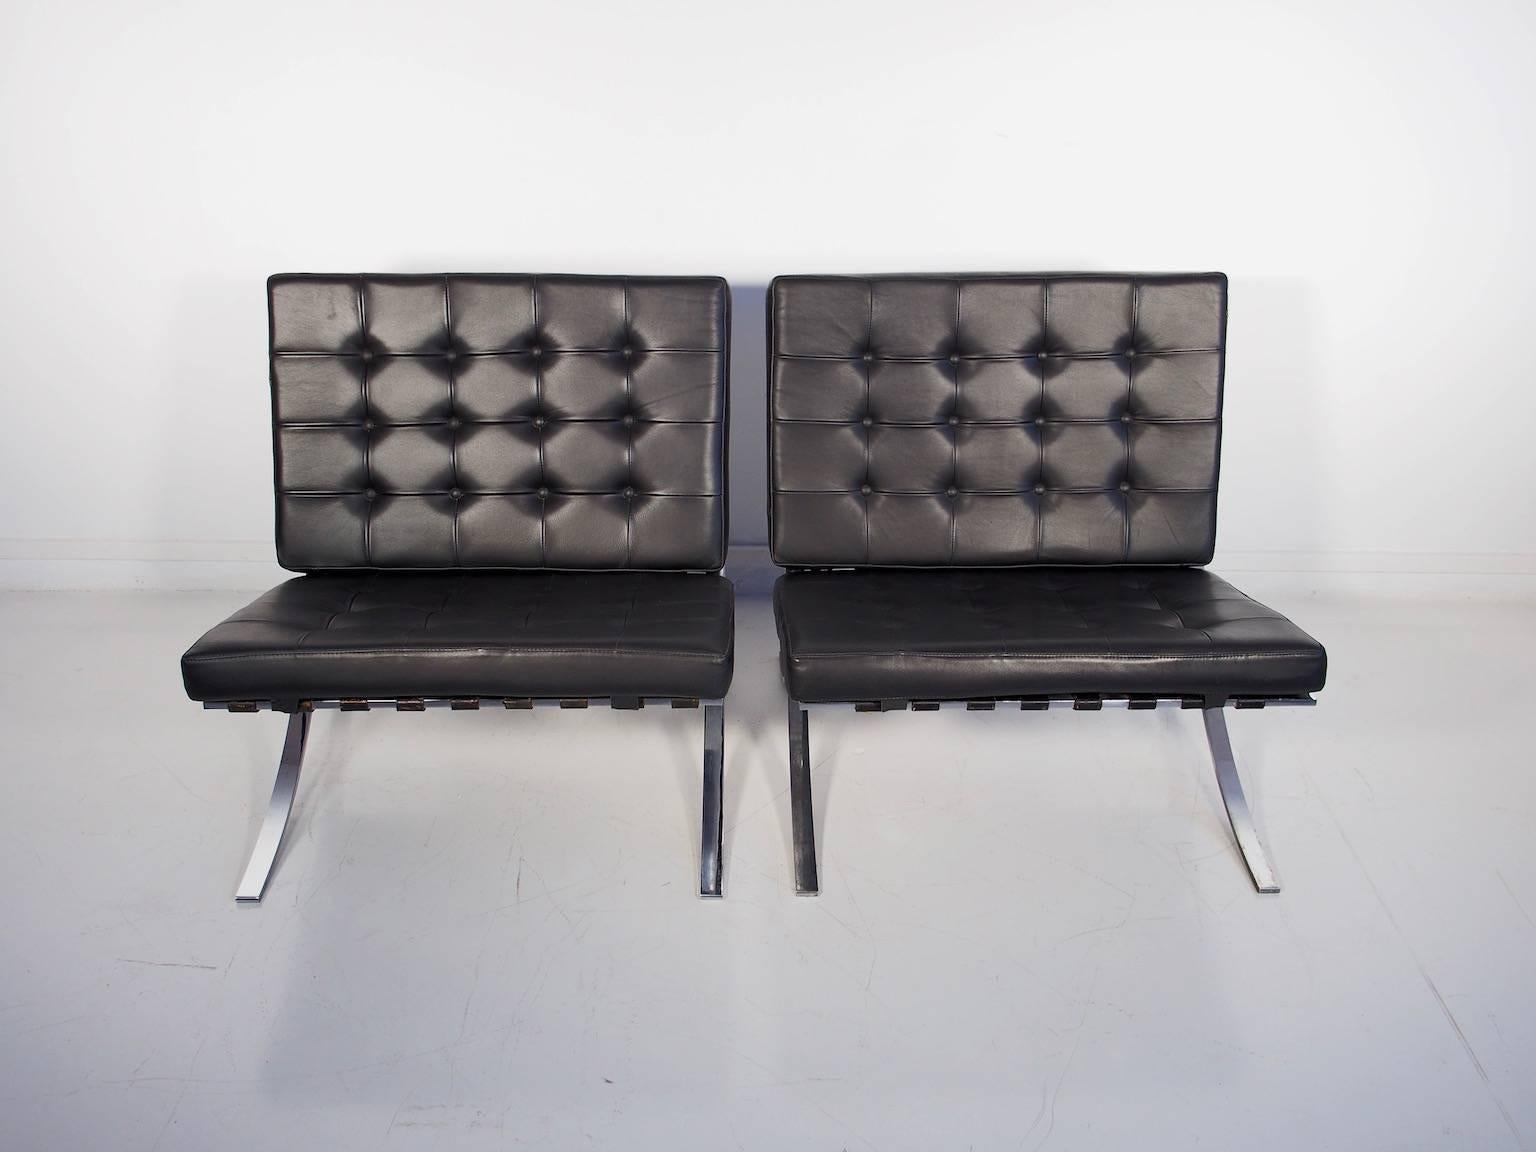 Pair of black leather Barcelona chairs by Ludwig Mies van der Rohe. These original Barcelona chairs feature a heavy chrome frame, but there are no markings or tags. They are a high quality pair of chairs in excellent condition. Cushions have been